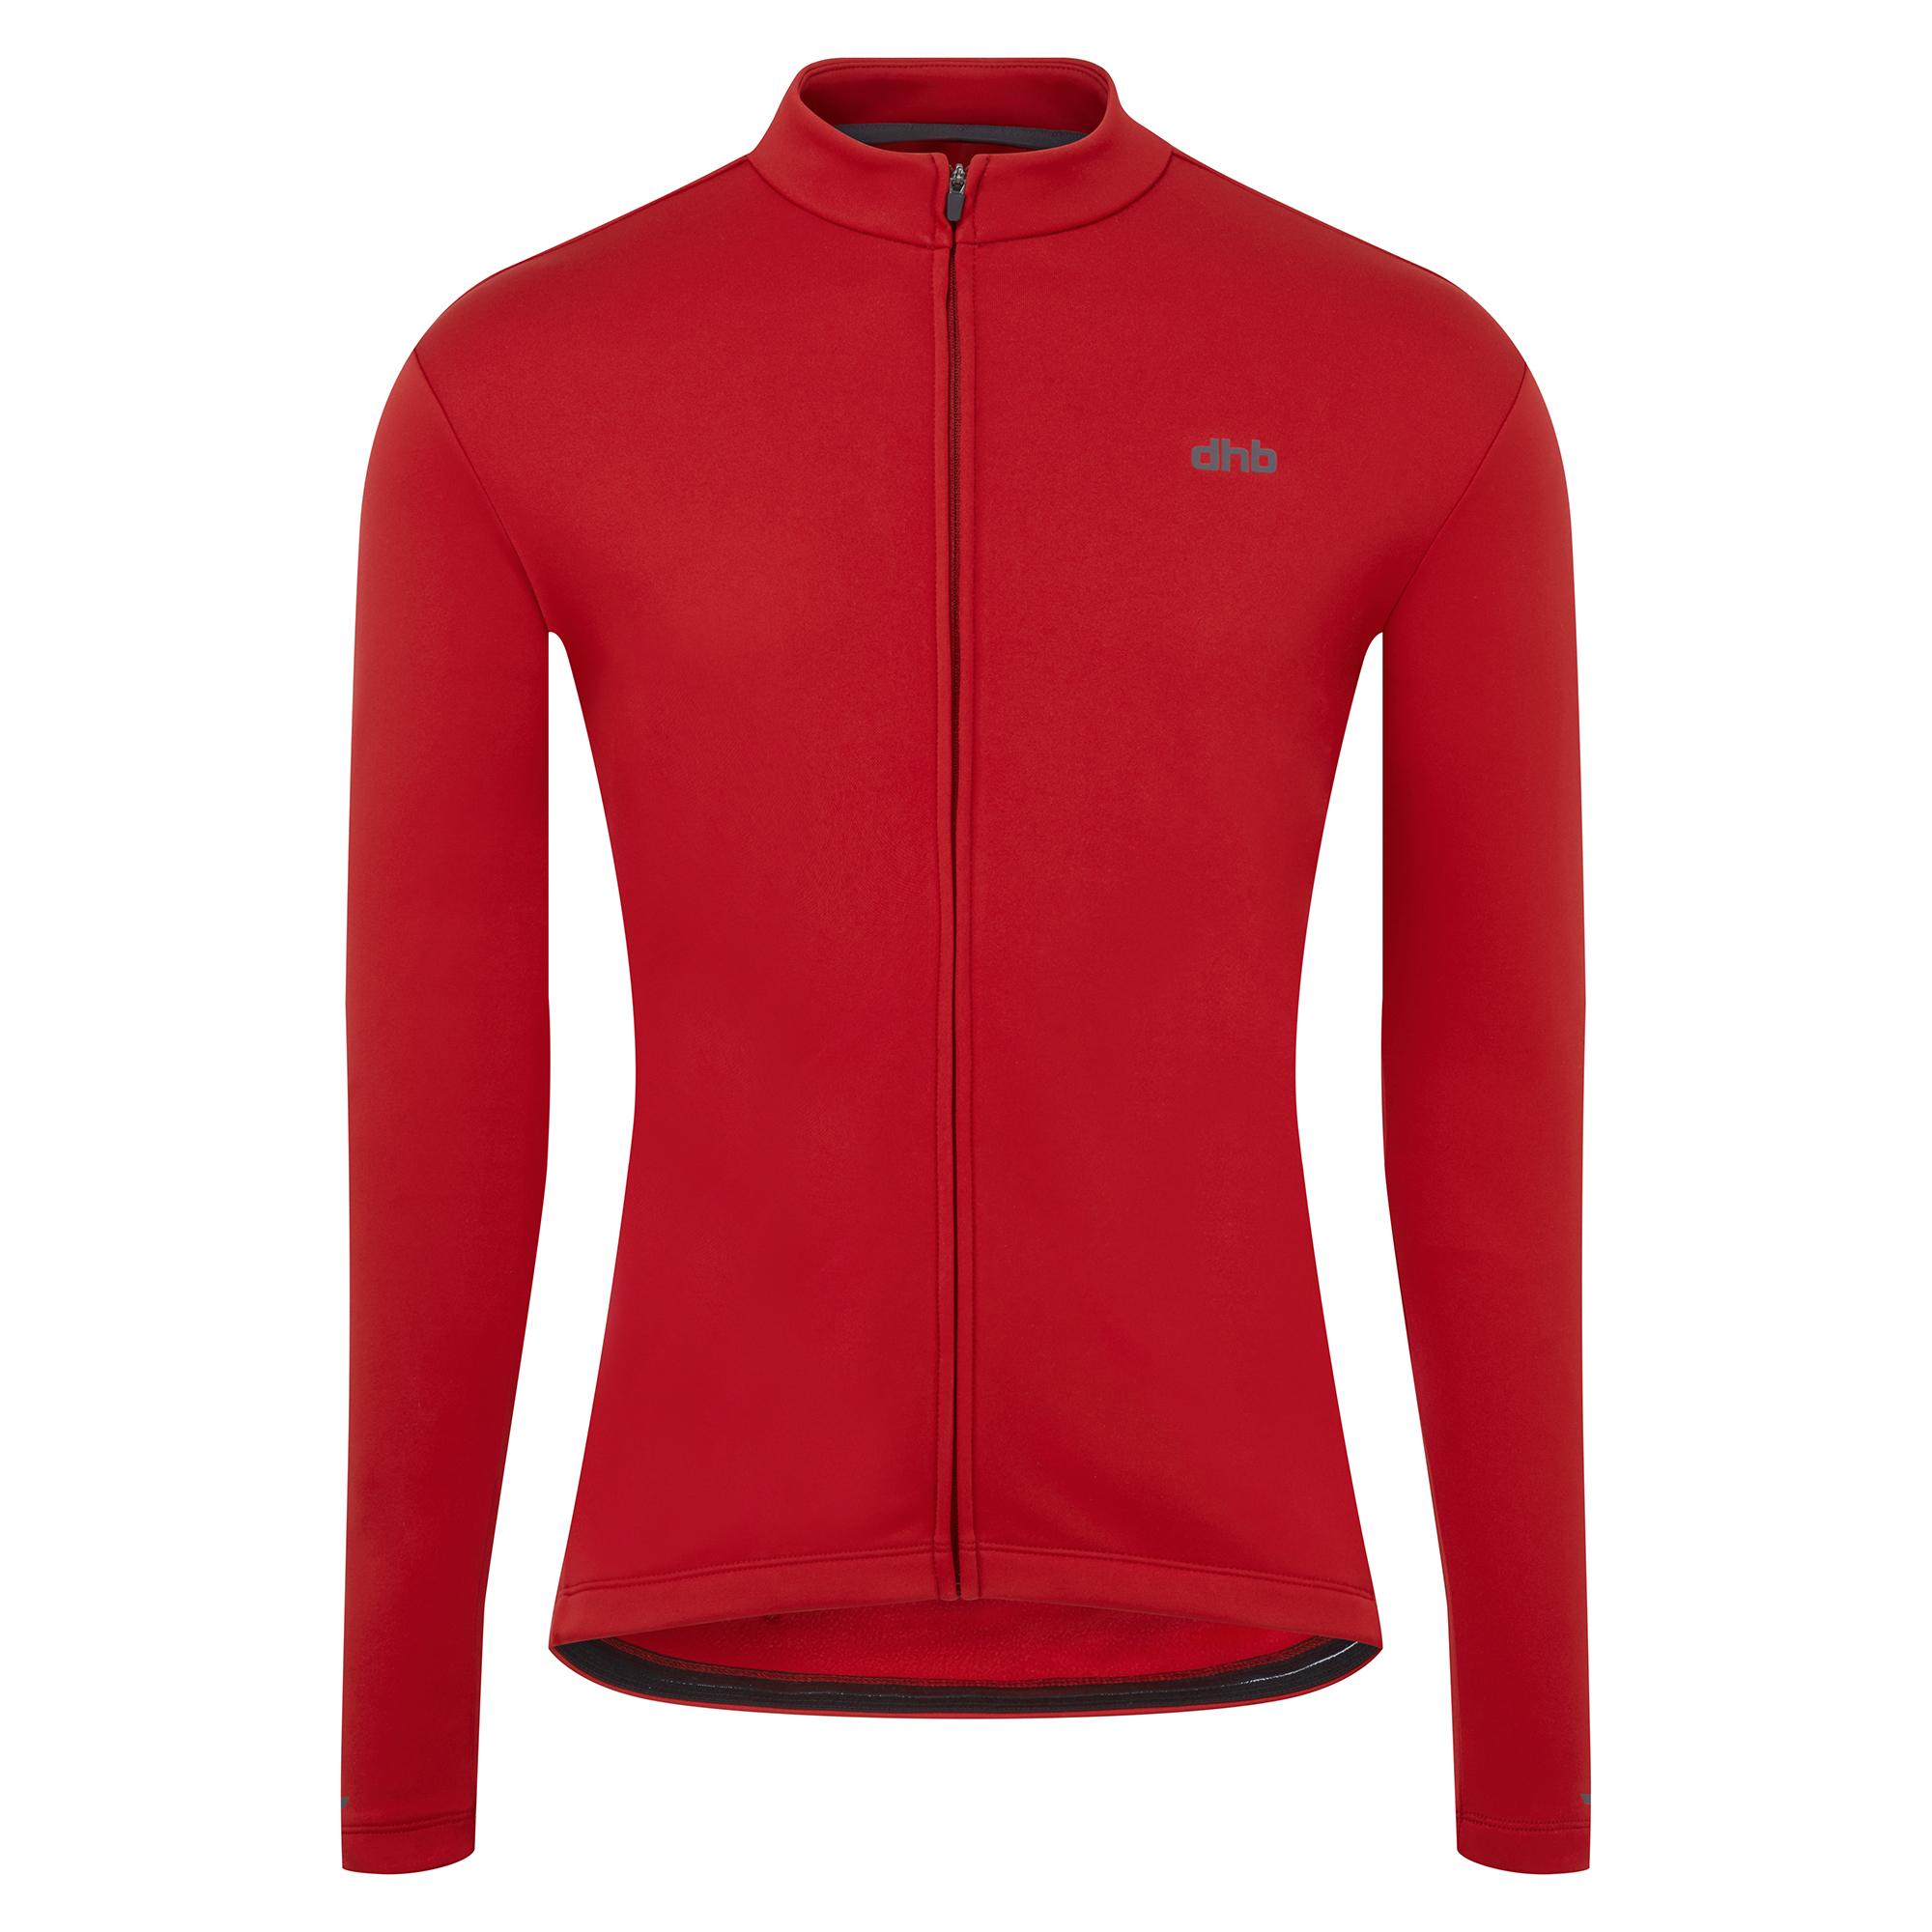 Dhb Mens Long Sleeve Thermal Cycling Jersey - Jester Red